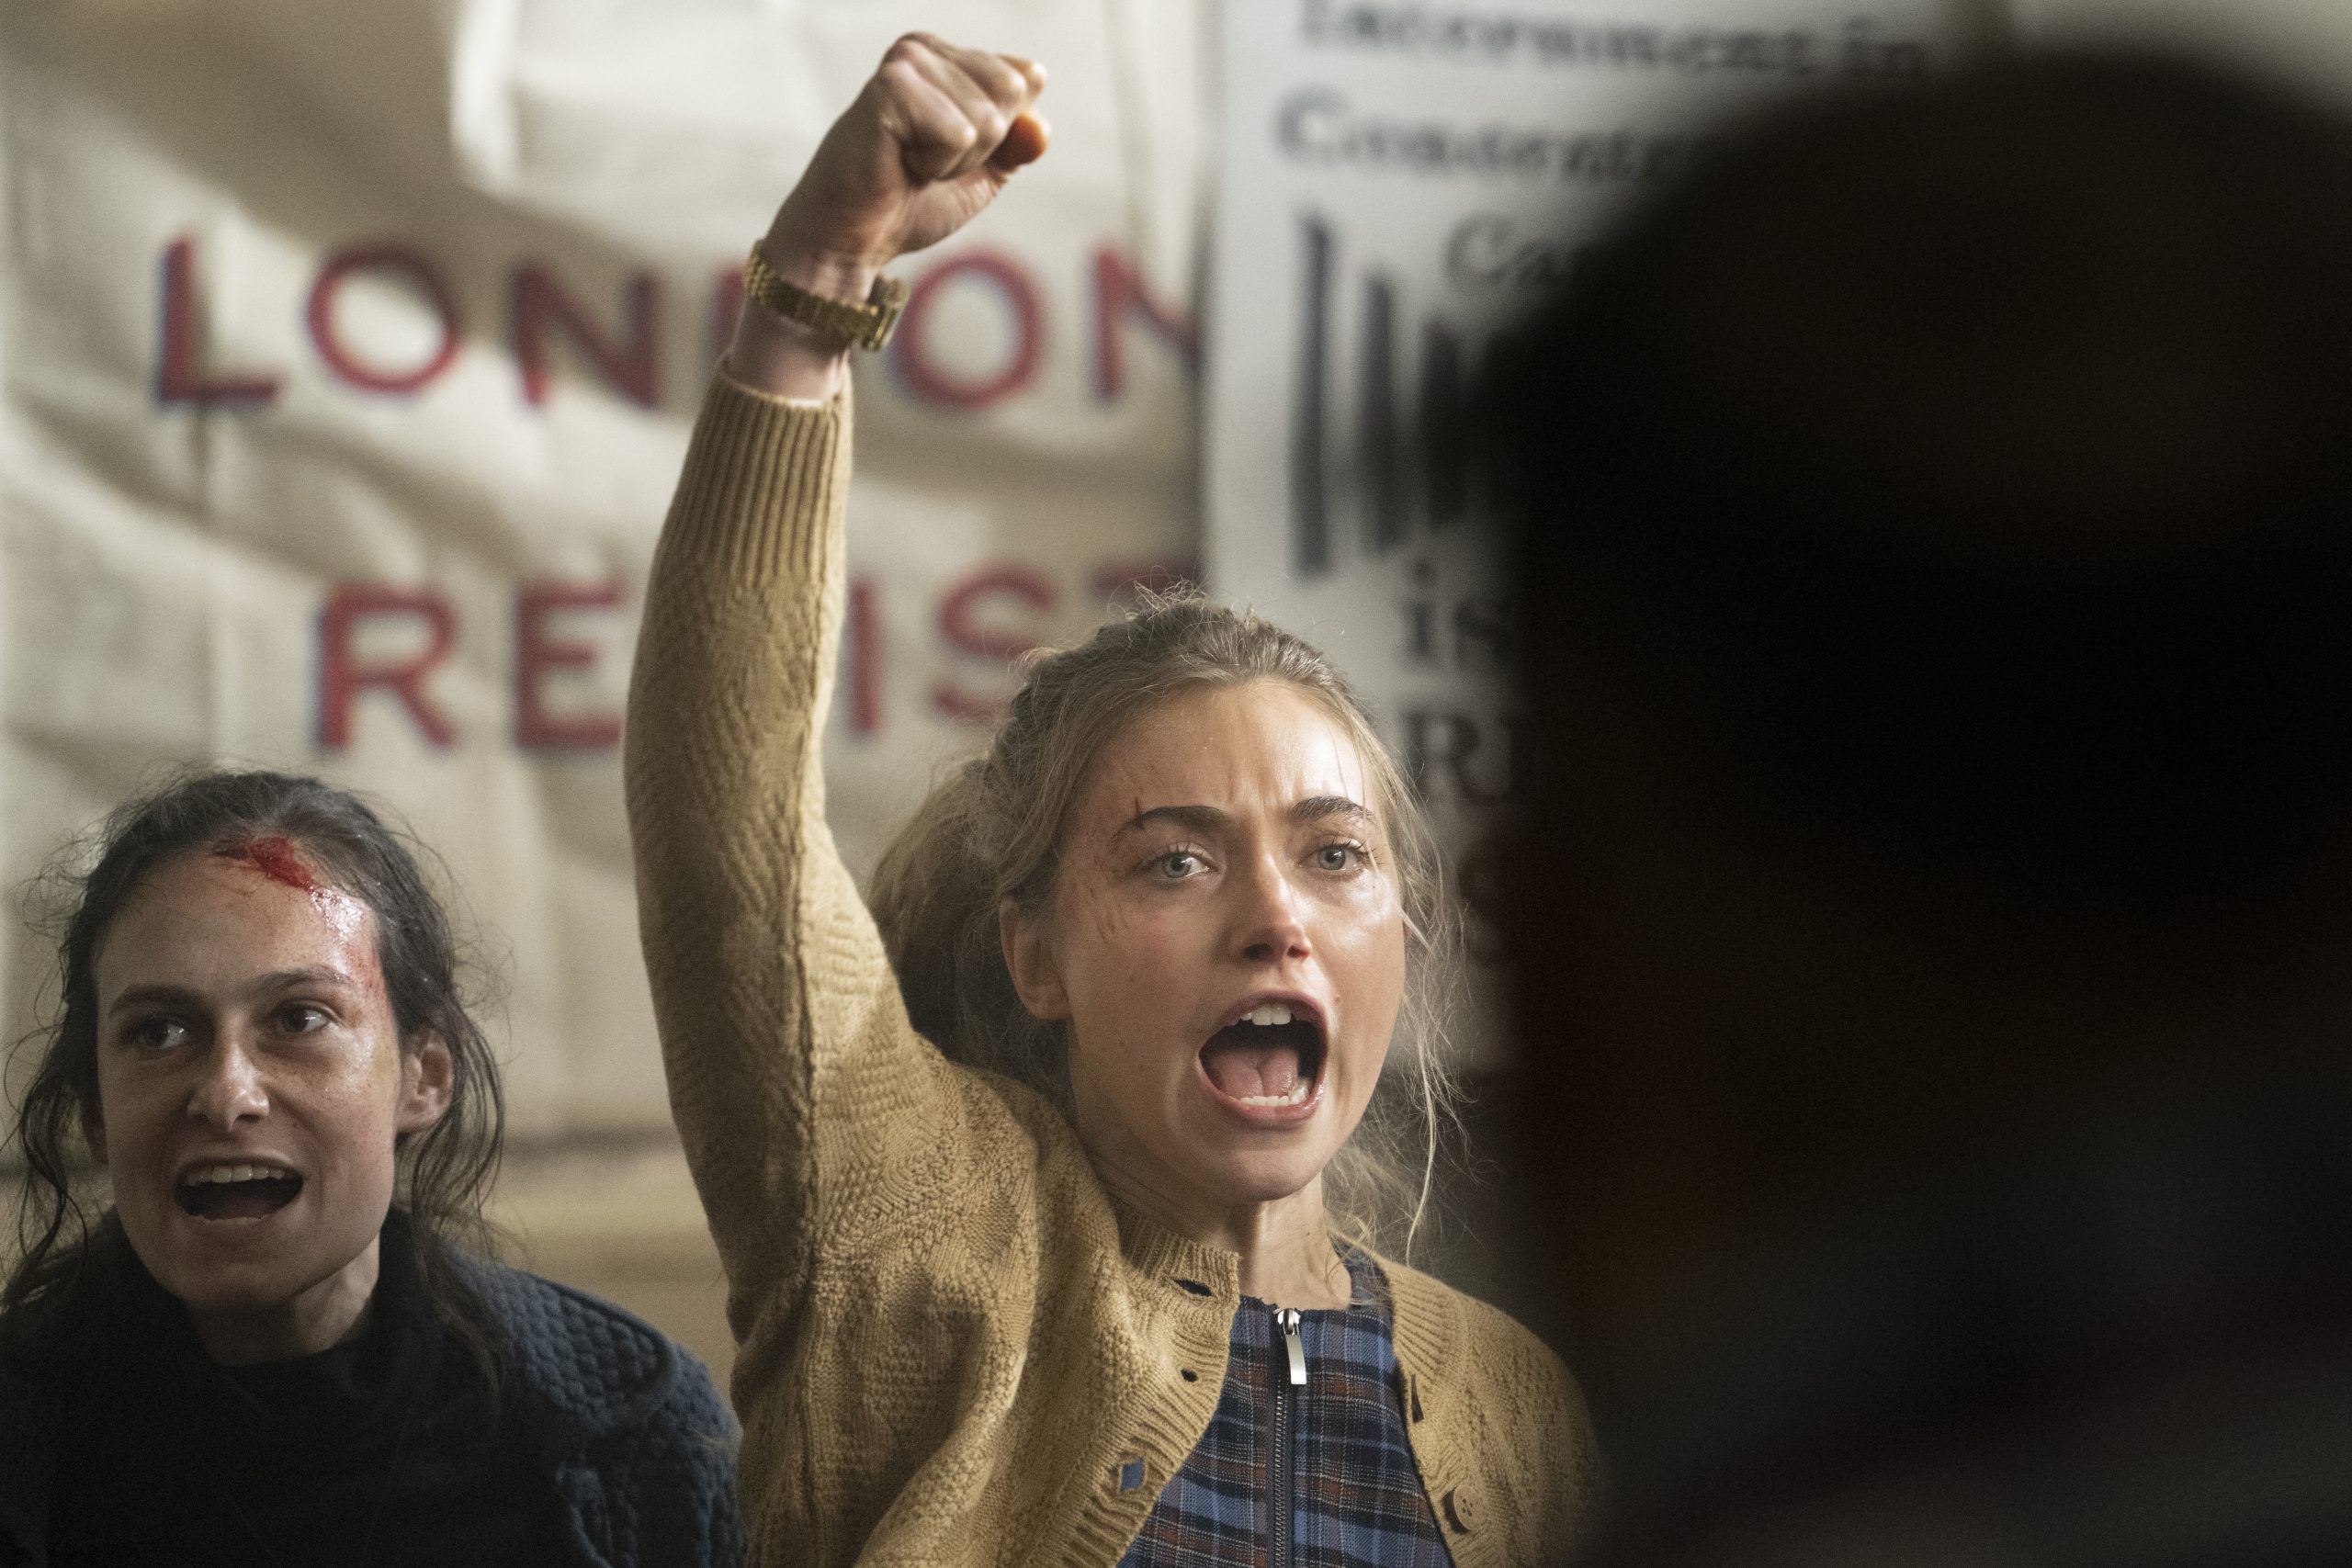 Imogen Poots stands with one hand raised high above her head, in the background there is woman with a bloody head and banners raised.